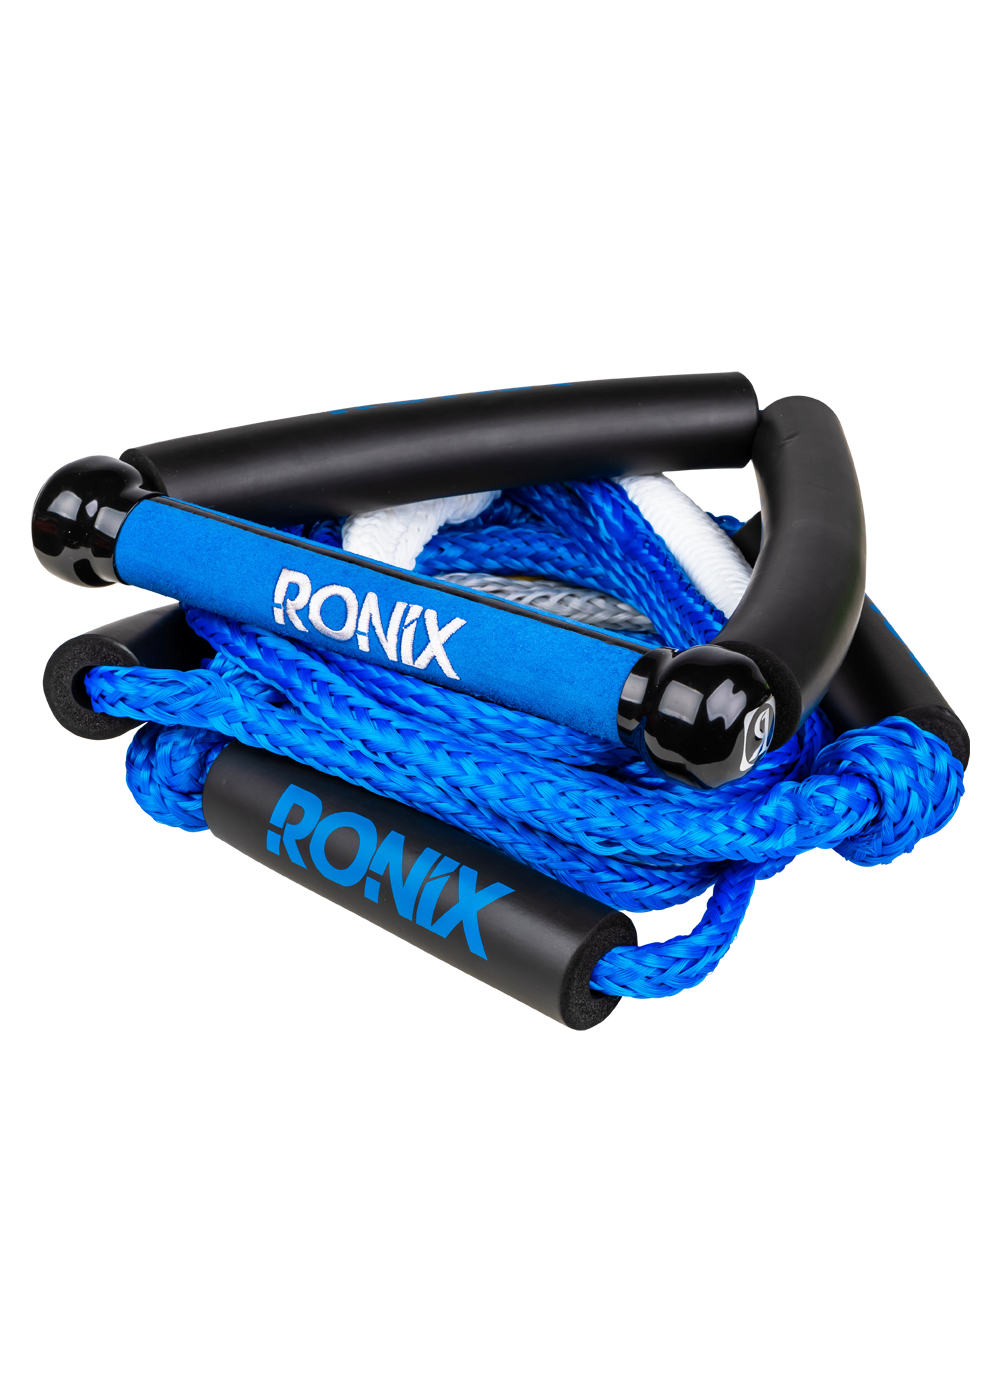 A Ronix Bungee Surf Rope-10" Handle Hide Grip-25ft 4-Sect. Rope - Asst. Color with embroidery of the word Ronix on it.